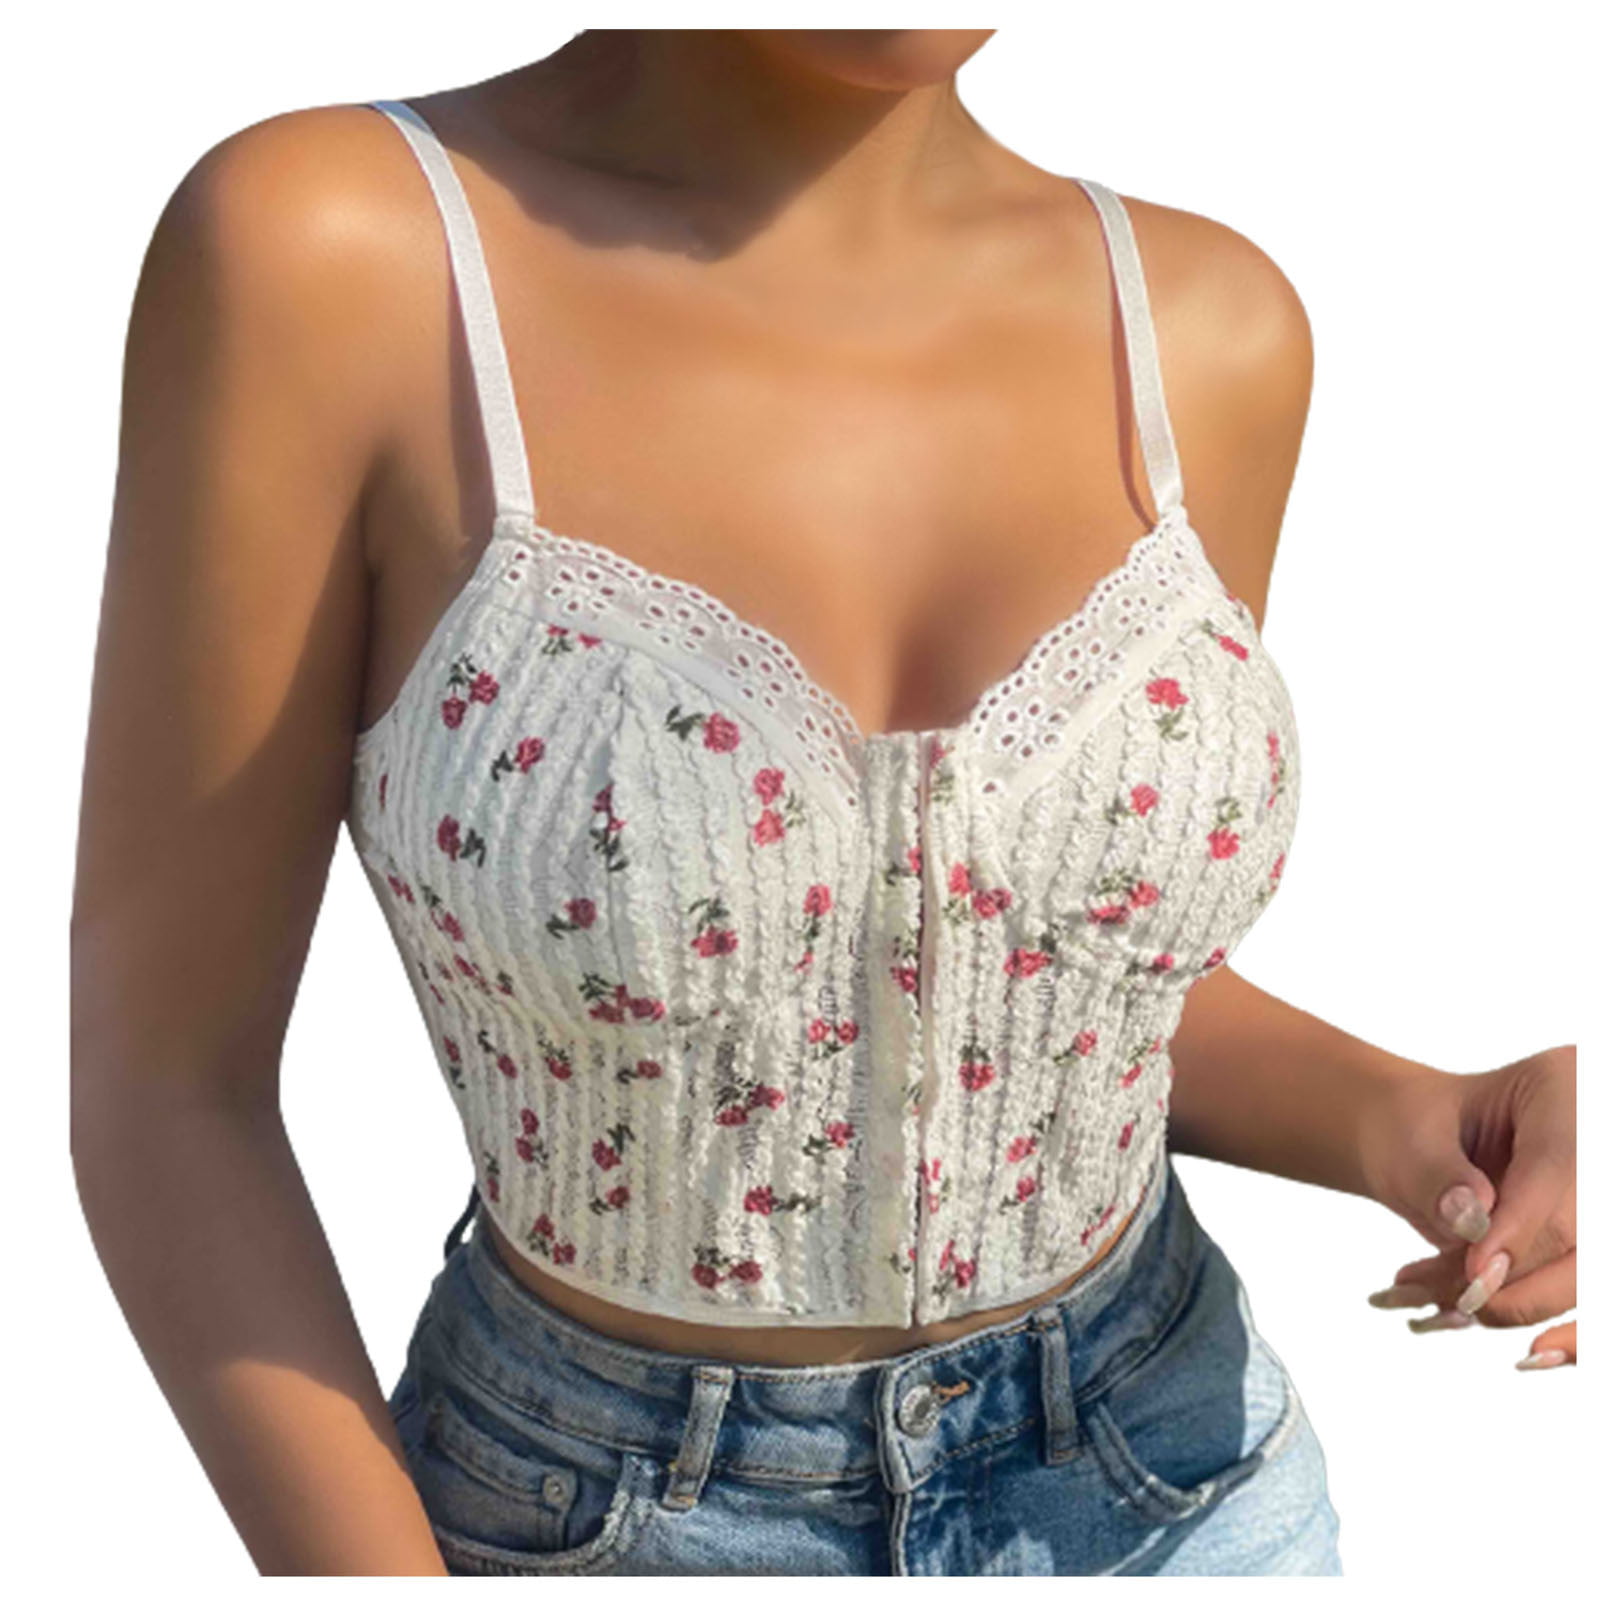 JDEFEG Lace Strap Insert Romper Women Bustier Corset Top Zipper Eyelet Lace  Up Floral Print Push Up Crop Tops Vintage Tank Top Party Clubwear Bodice